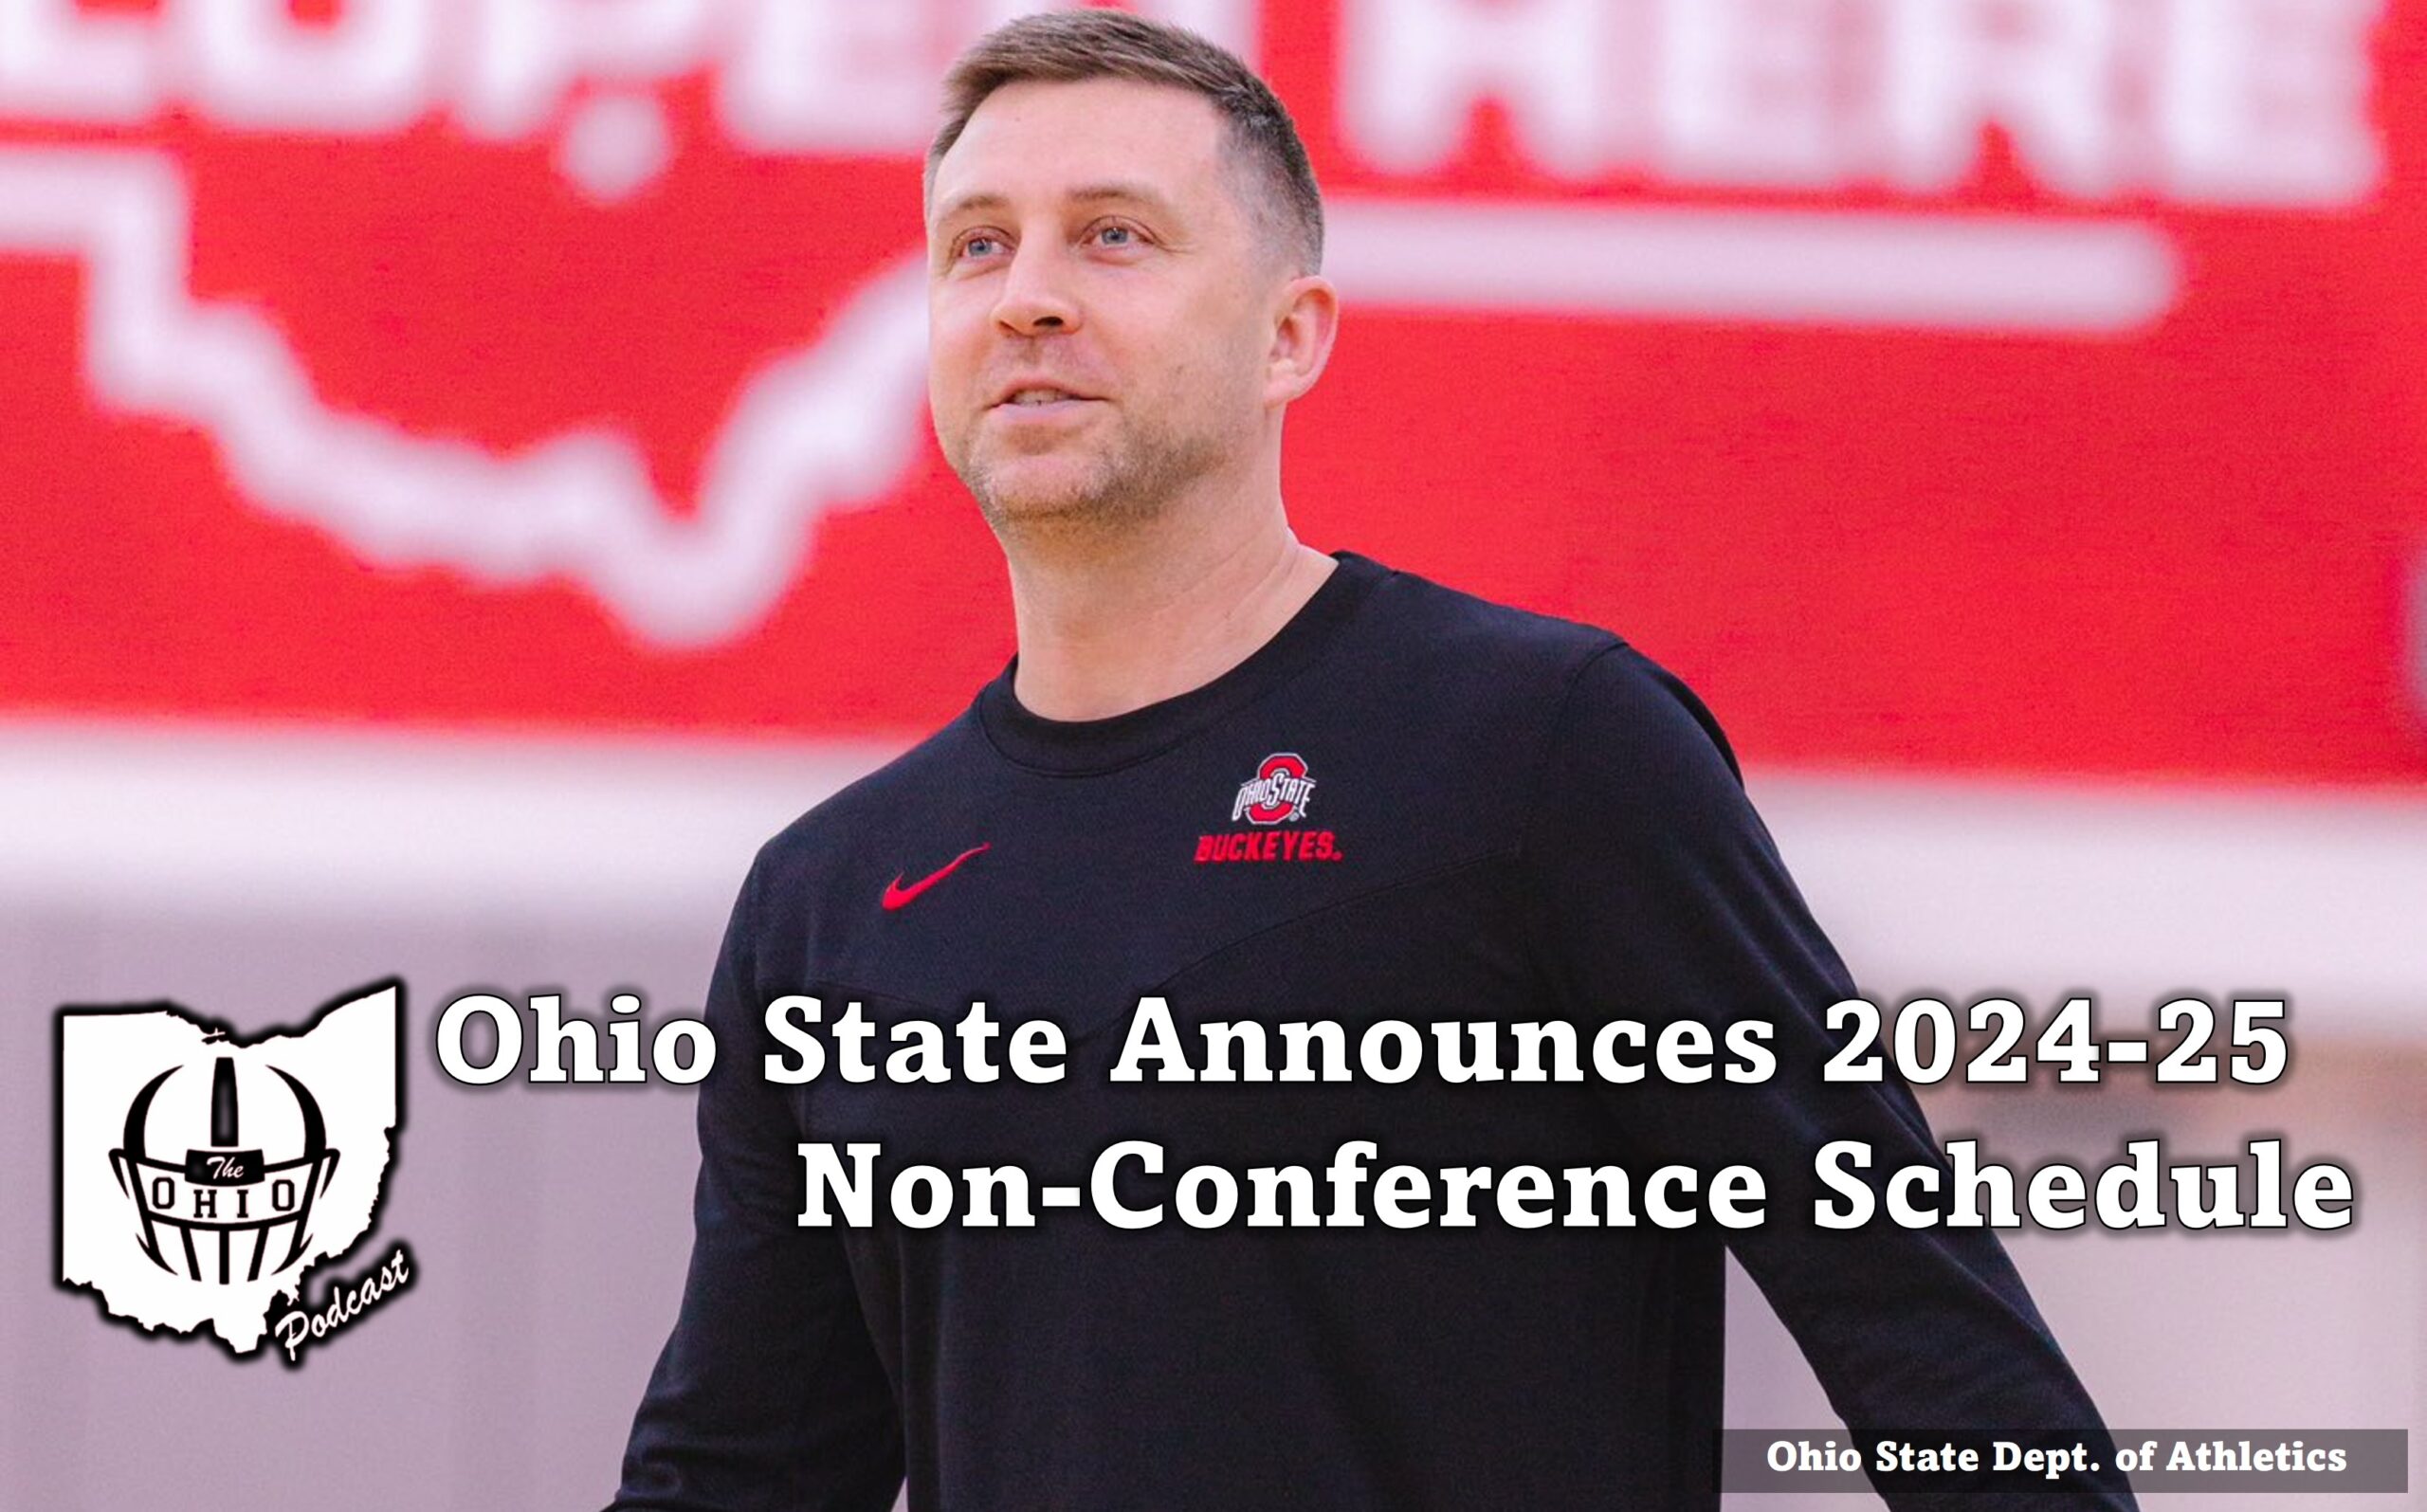 Buckeye Basketball: Diebler’s Exciting 2024-25 Non-Conference Schedule